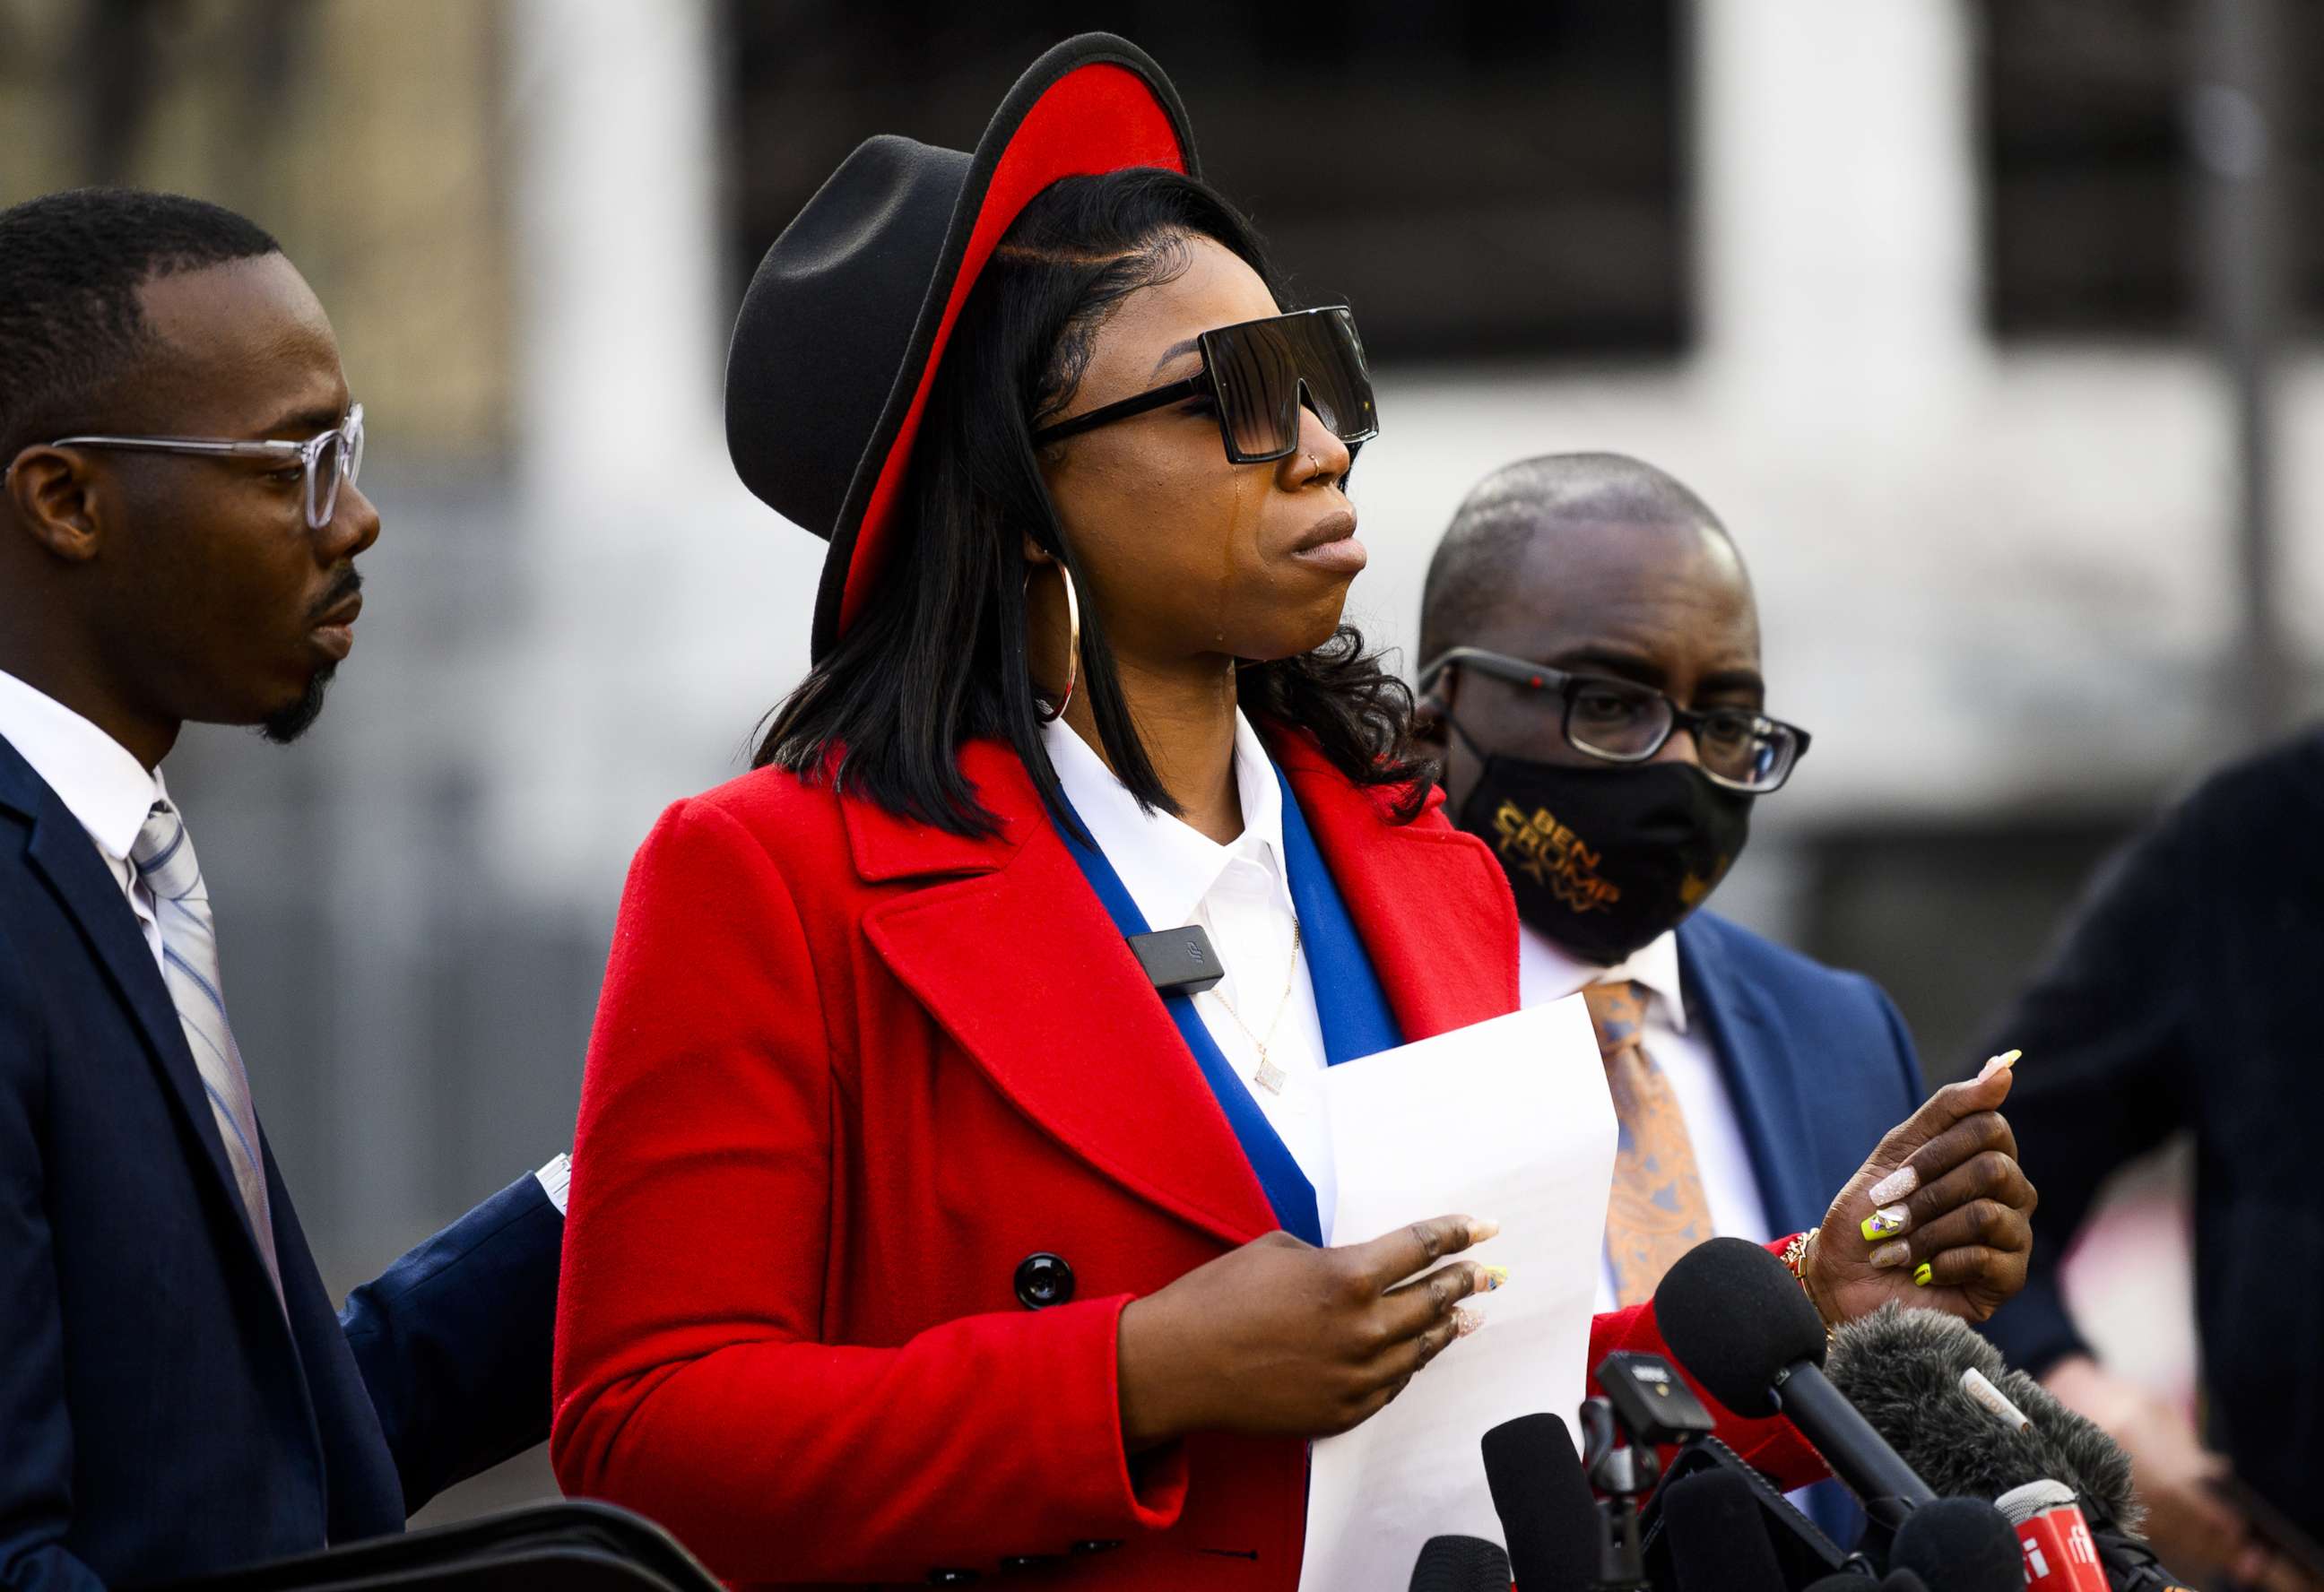 PHOTO: A tear rolls down the cheek of Bridgett Floyd, the sister of George Floyd, as she speaks during a press conference outside the Hennepin County Government Center on March 8, 2021, in Minneapolis.